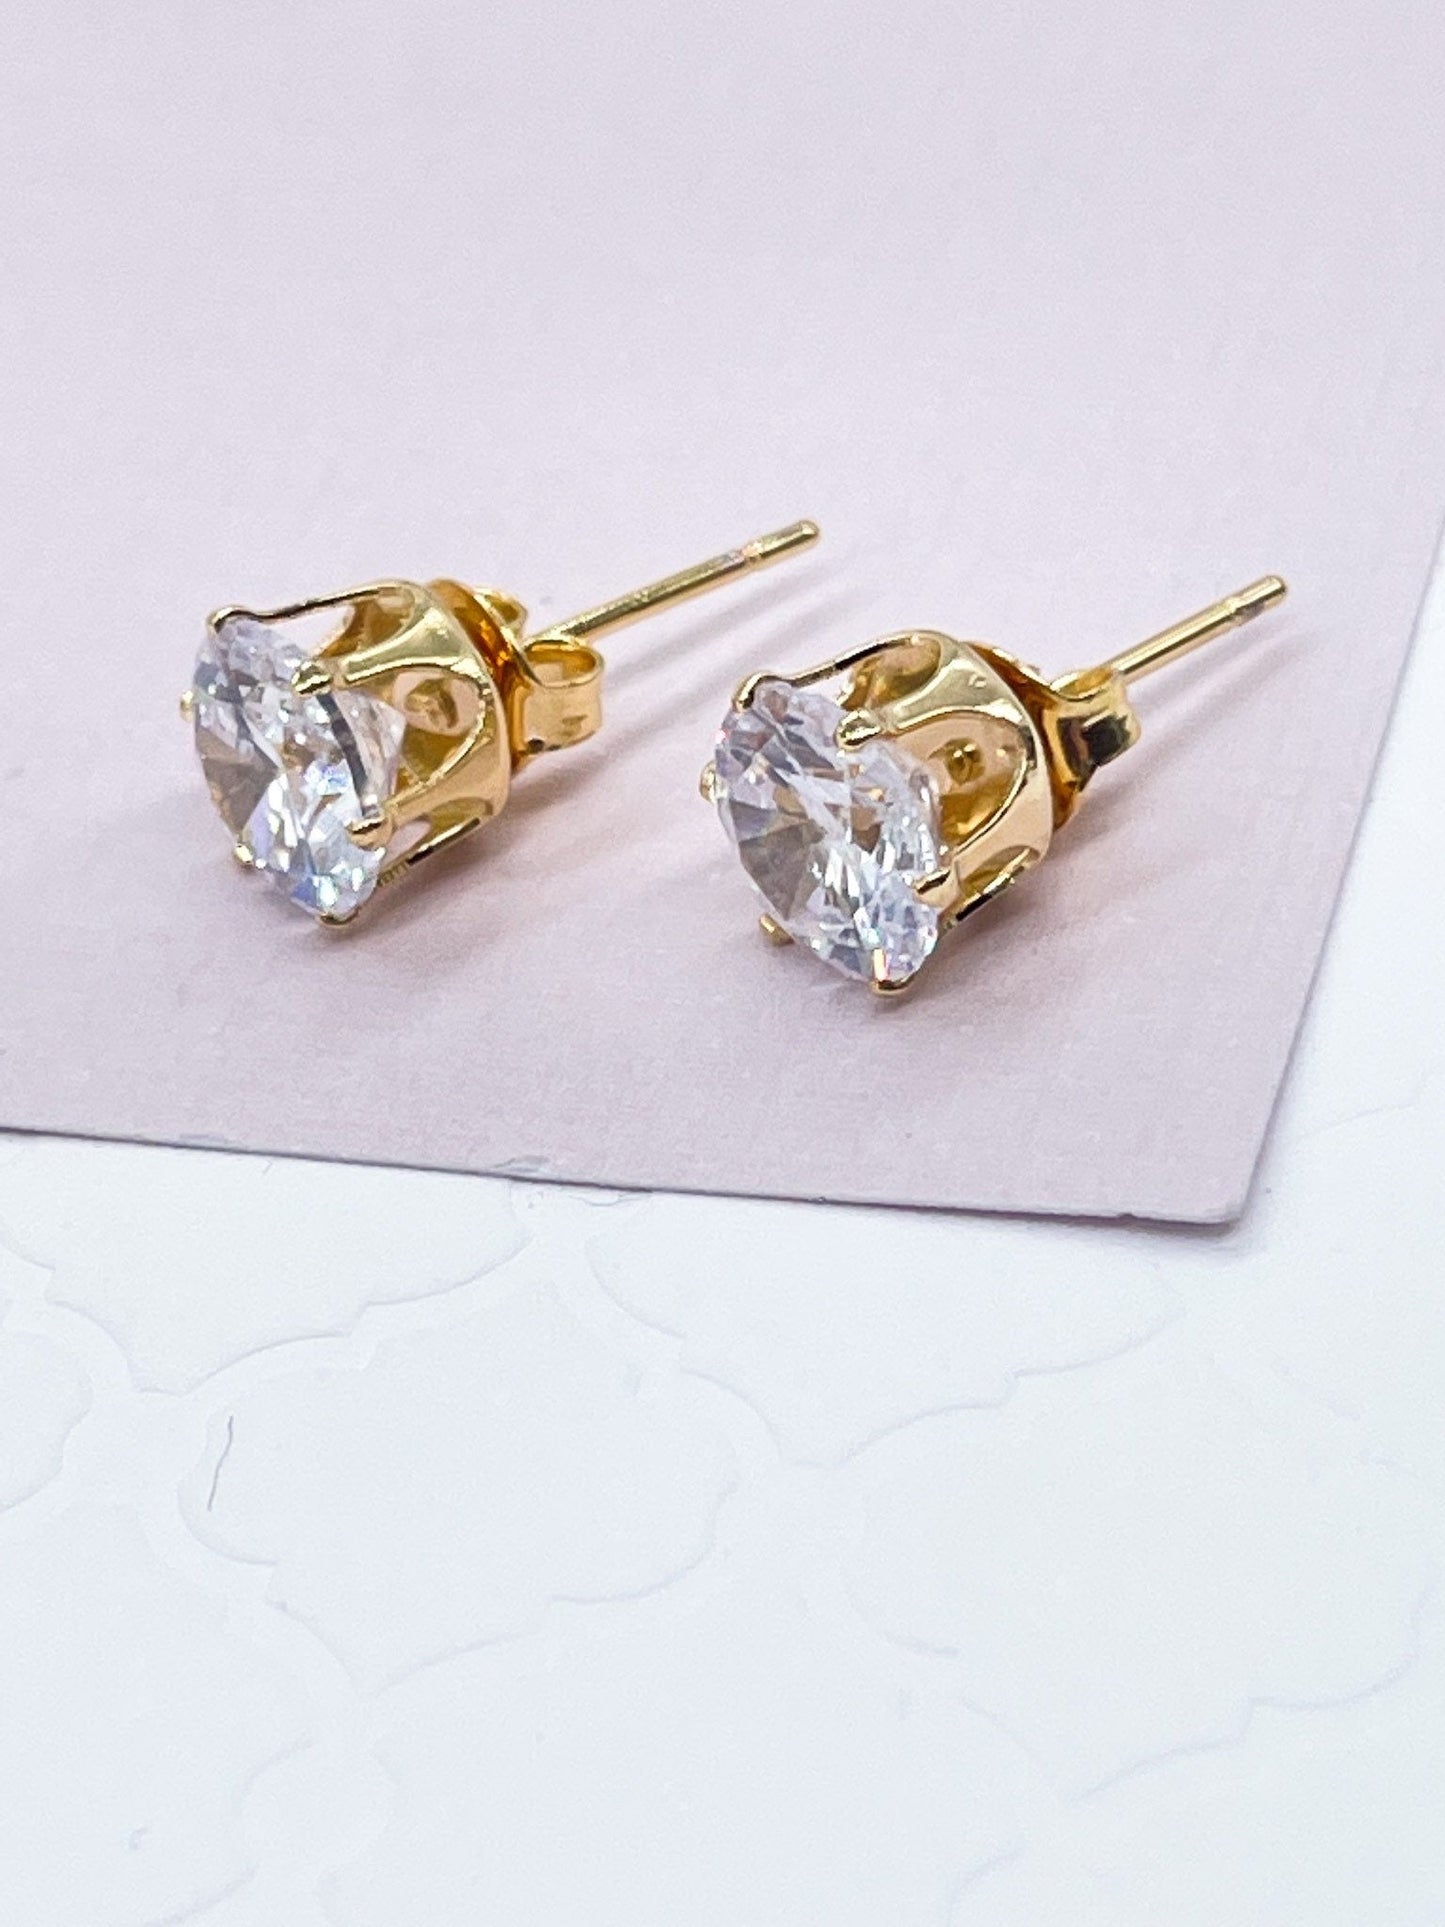 18k Gold Layered 8mm Cubic Zirconia Round Stud Earrings Crown Settings